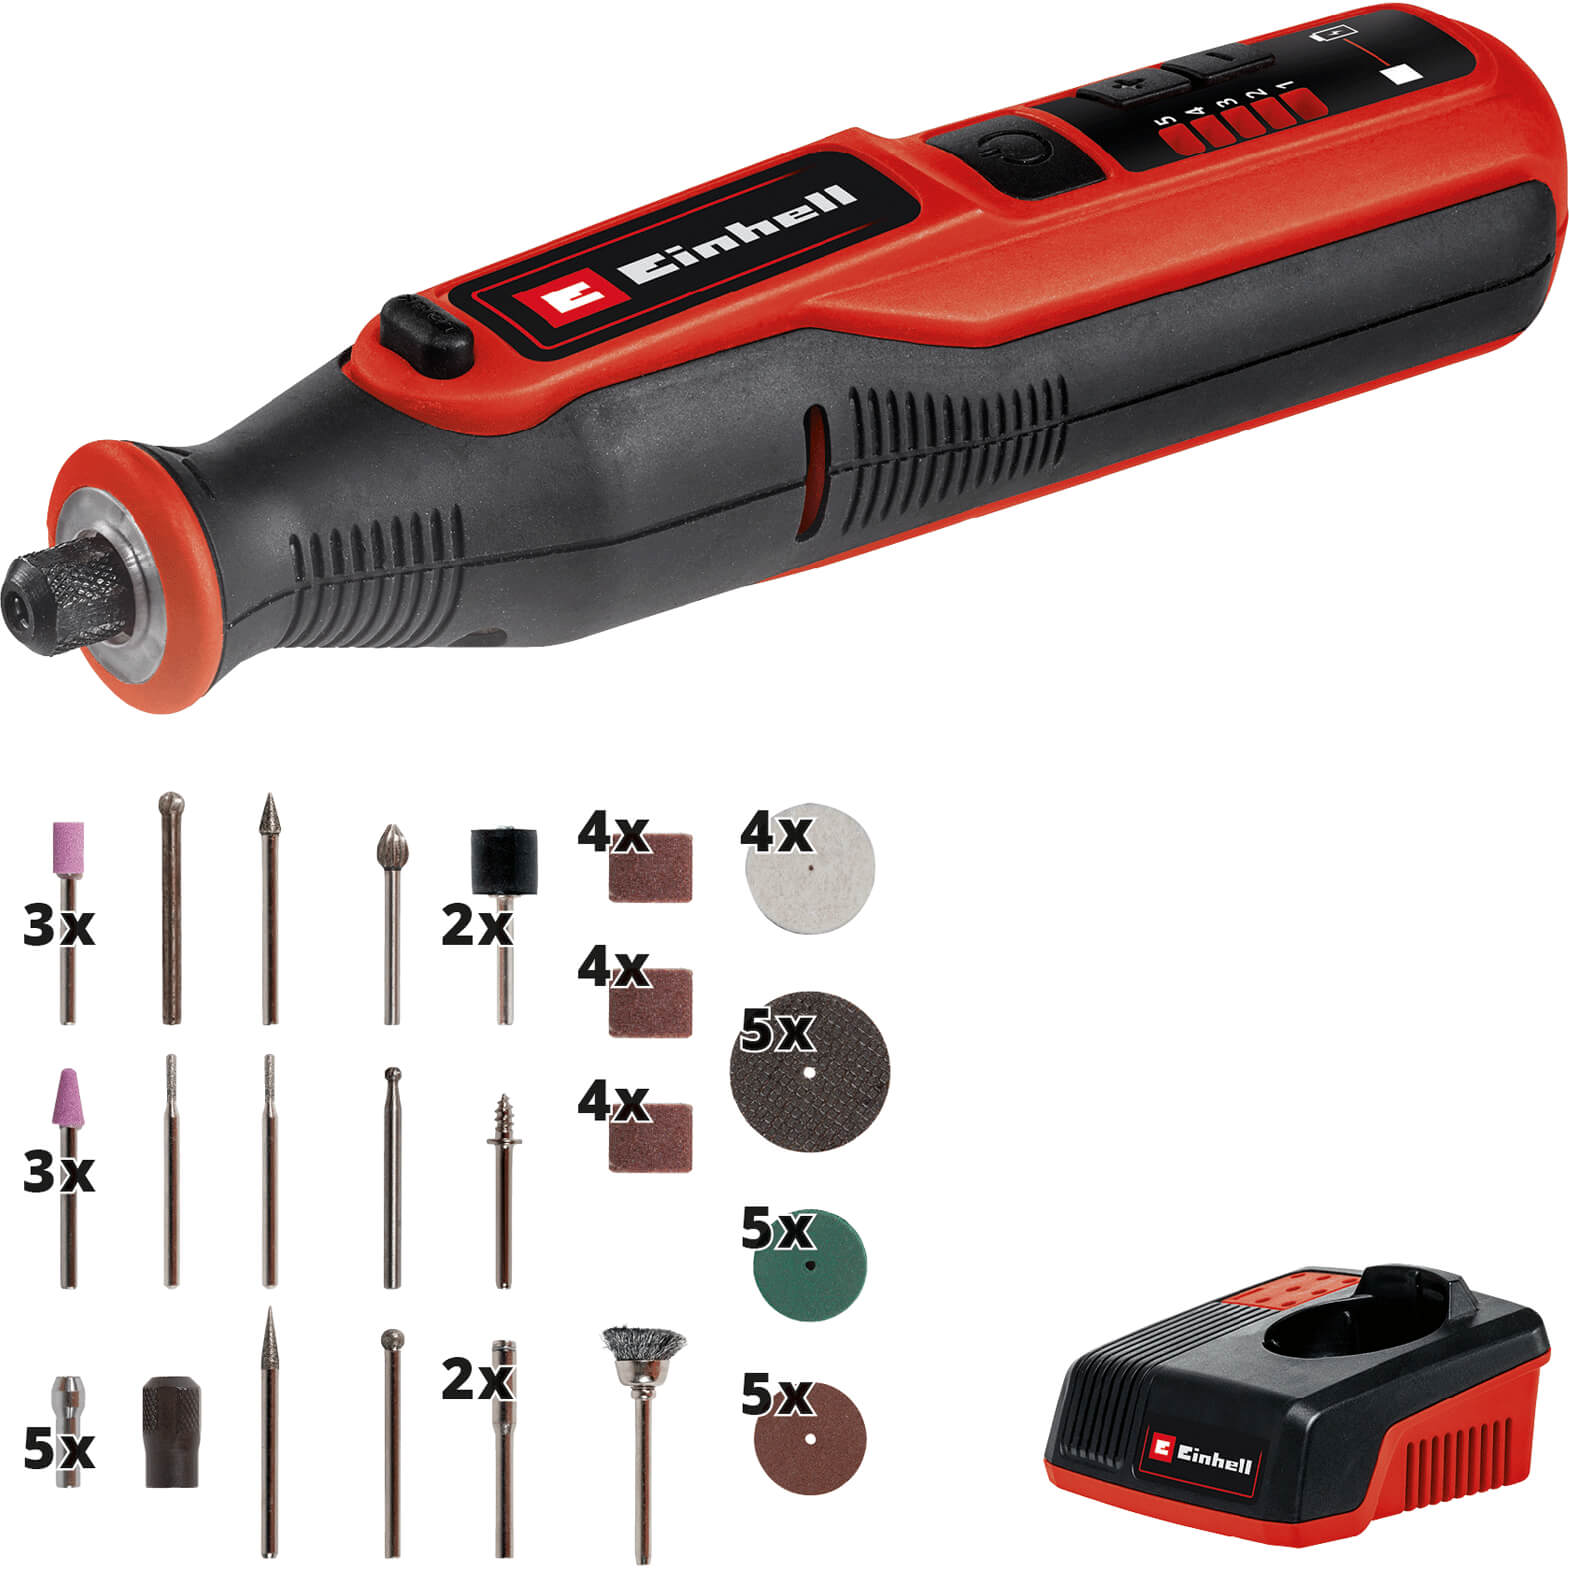 Image of Einhell TE-MT 7.2 Li 7.2v Cordless Rotary Multi Tool with 57 Accessories 1 x 1.5ah Integrated Li-ion Charger Case